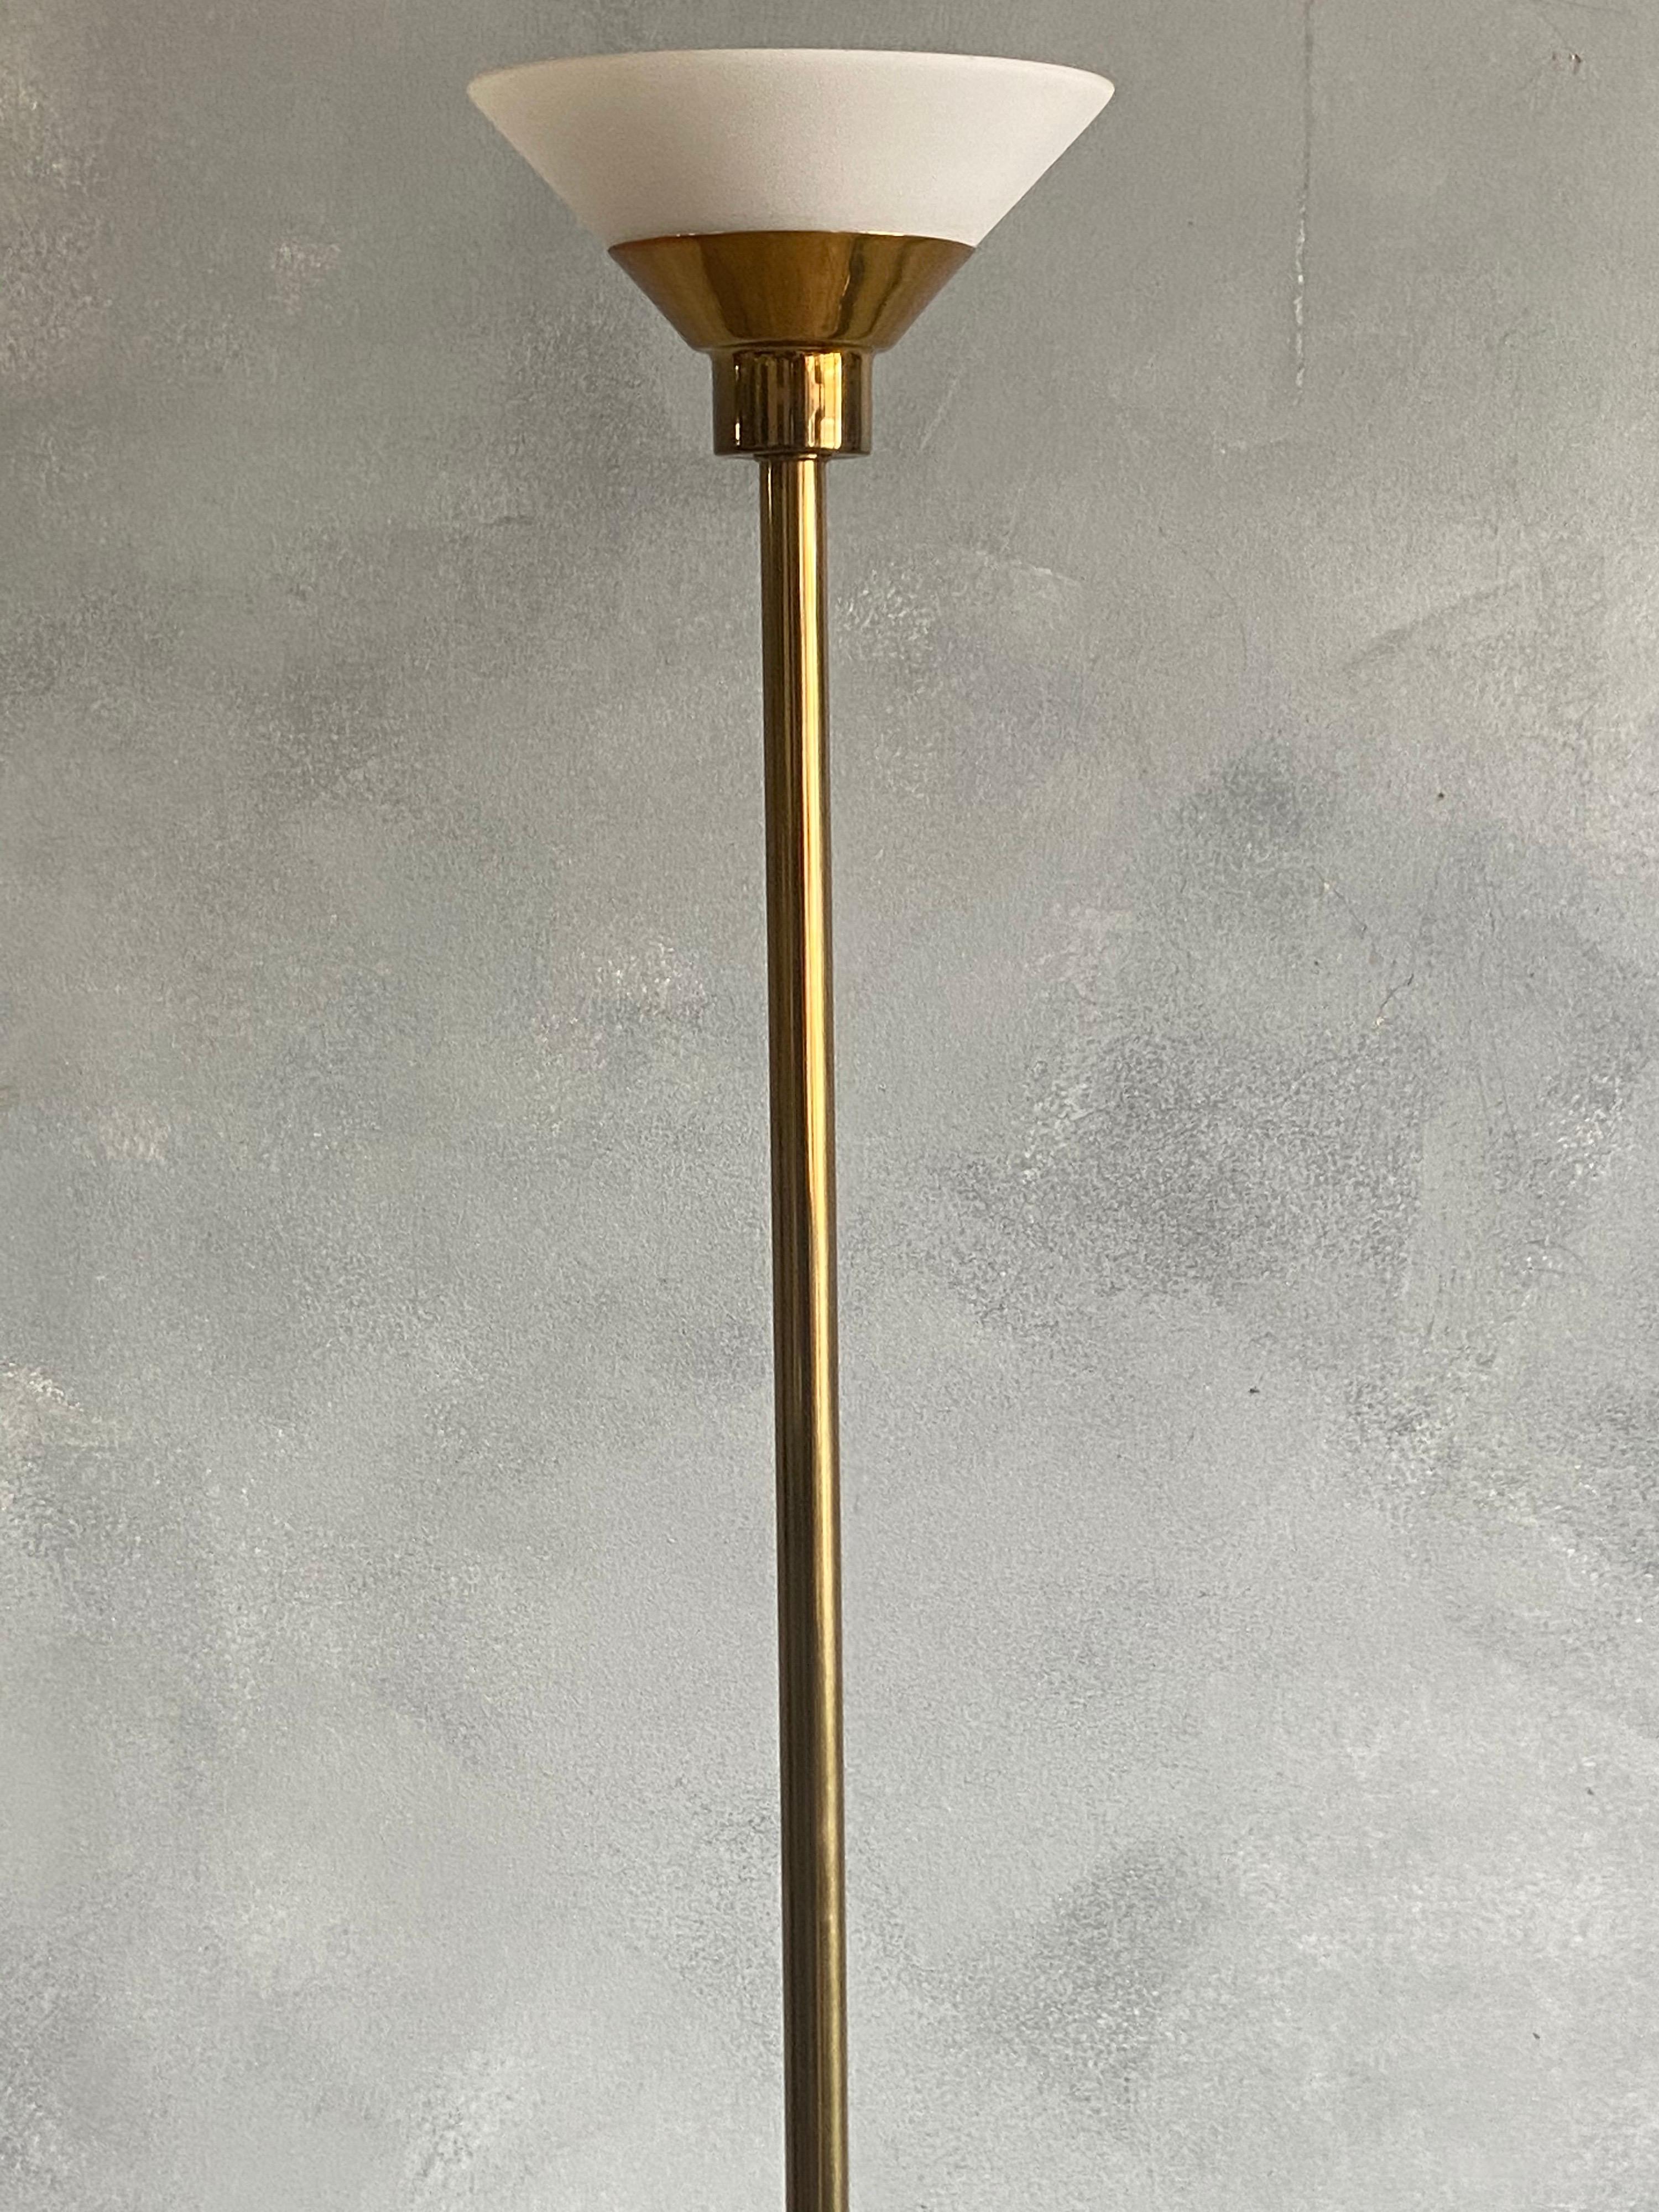 For your consideration is this elegant and space saving floor lamp with white glass shade. It takes a halogen bulb and there are LED replacements. In working order and ready for use.